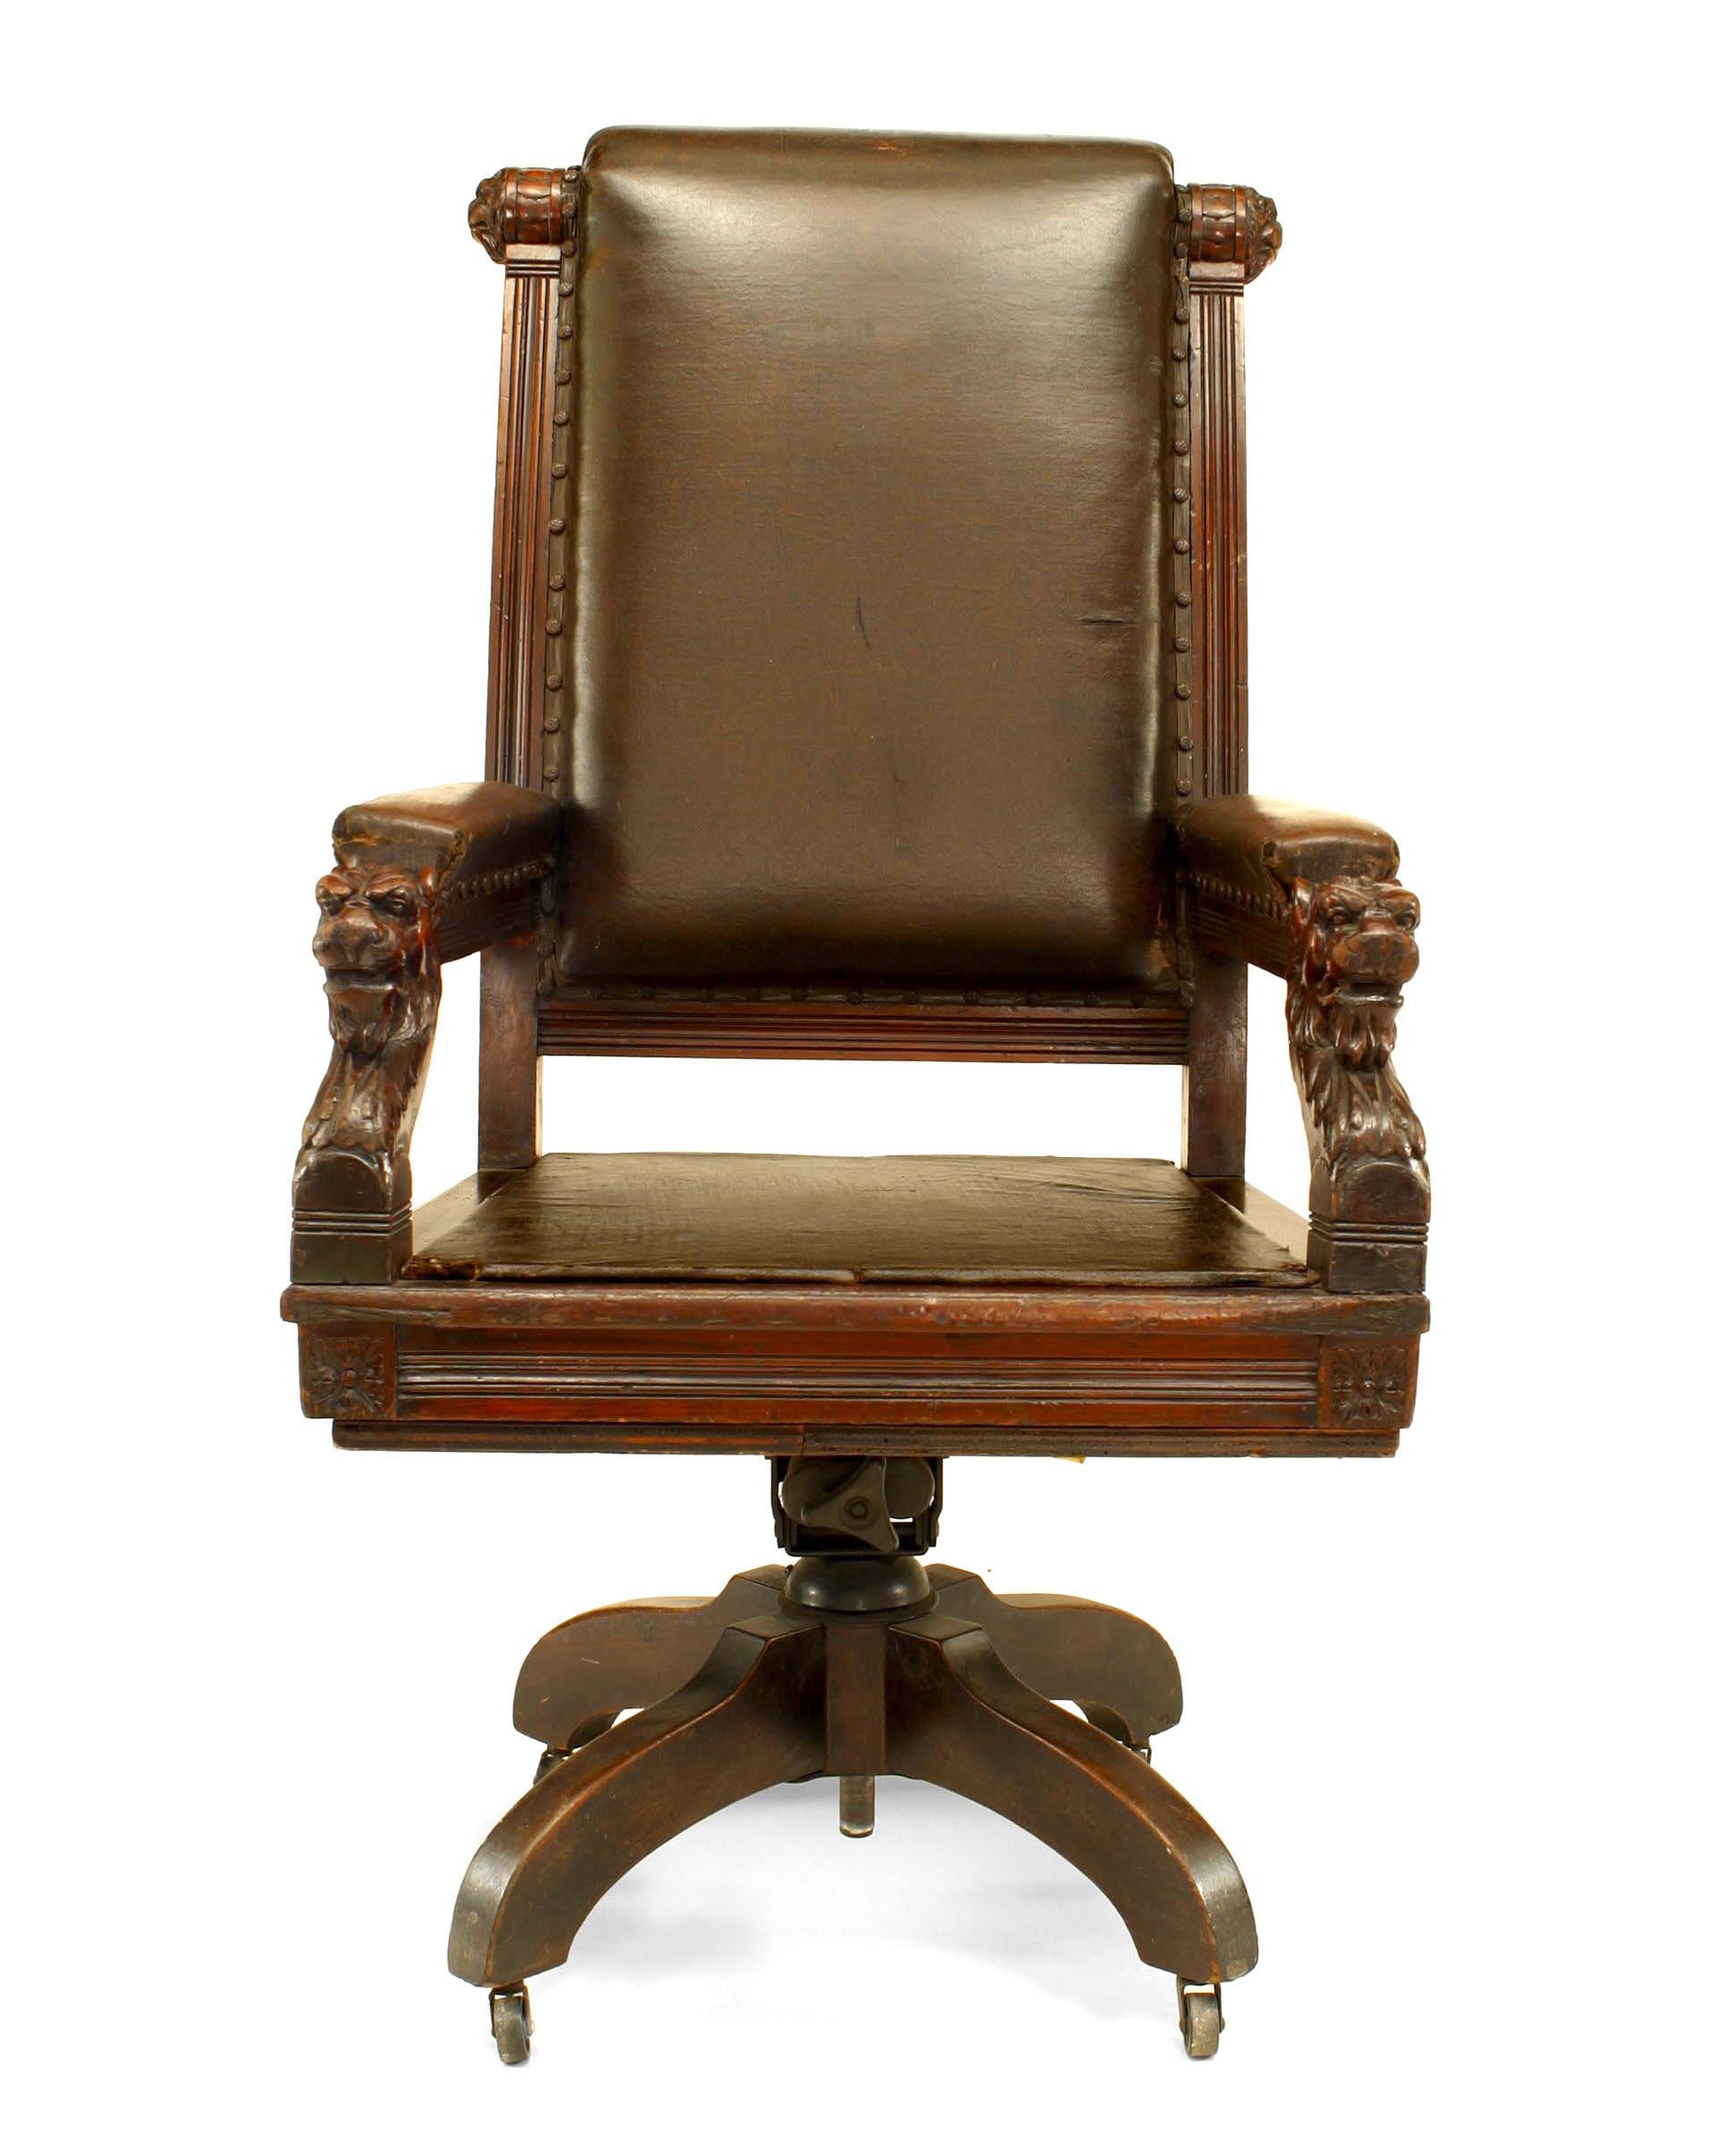 English Victorian high back brown leather judge's swivel chair with carved lion heads on arms.